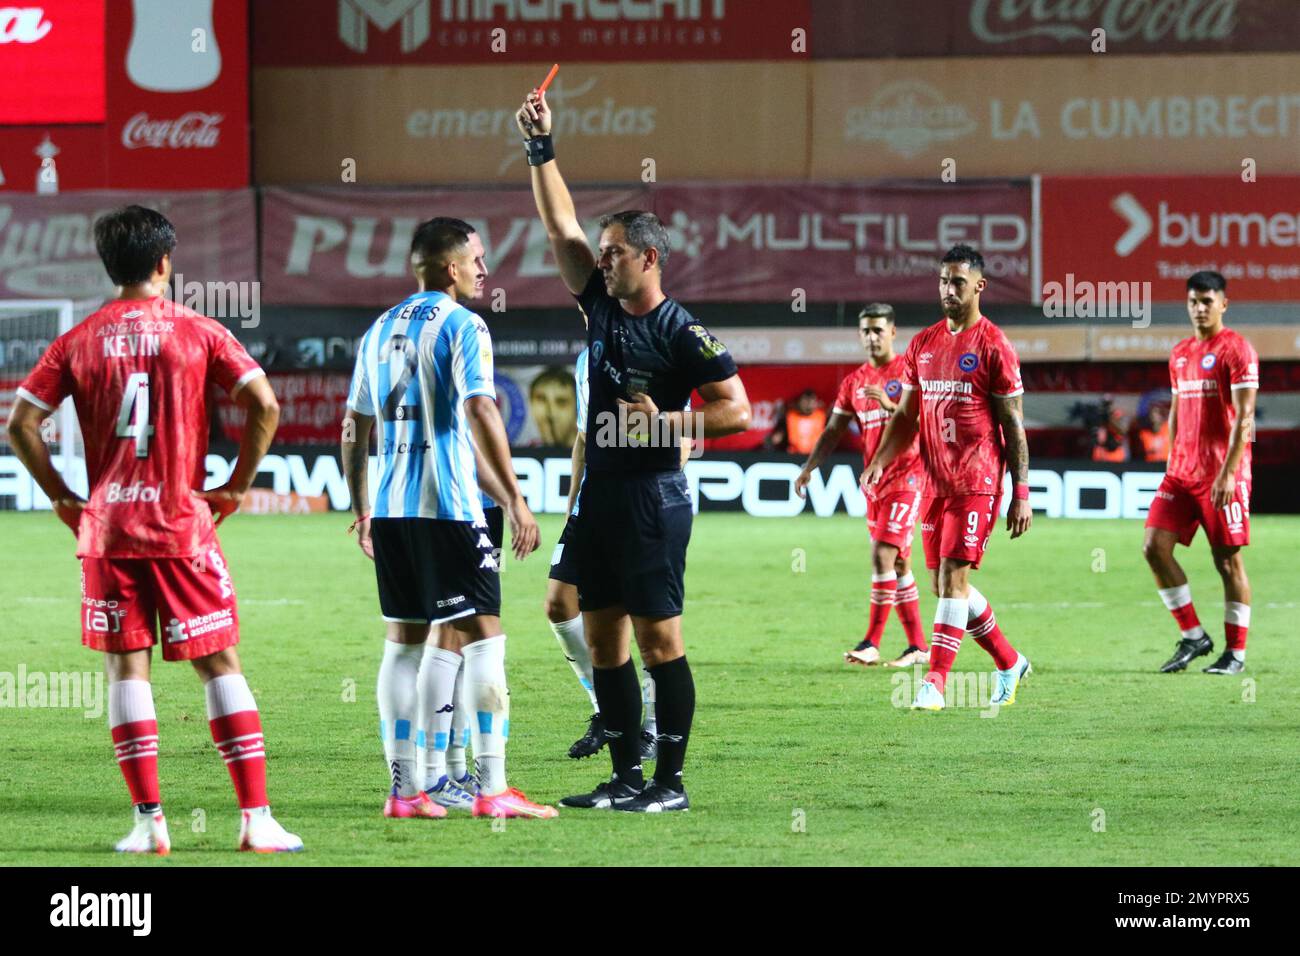 Buenos Aires, Argentina, 4th Feb 2023, Fernando Echenique shows the red card to Juan Caceres of Racing Club during a match for the 2nd round of Argentina´s Liga Profesional de Fútbol Binance Cup at Diego Maradona Stadium (Photo: Néstor J. Beremblum) Credit: Néstor J. Beremblum/Alamy Live News Stock Photo